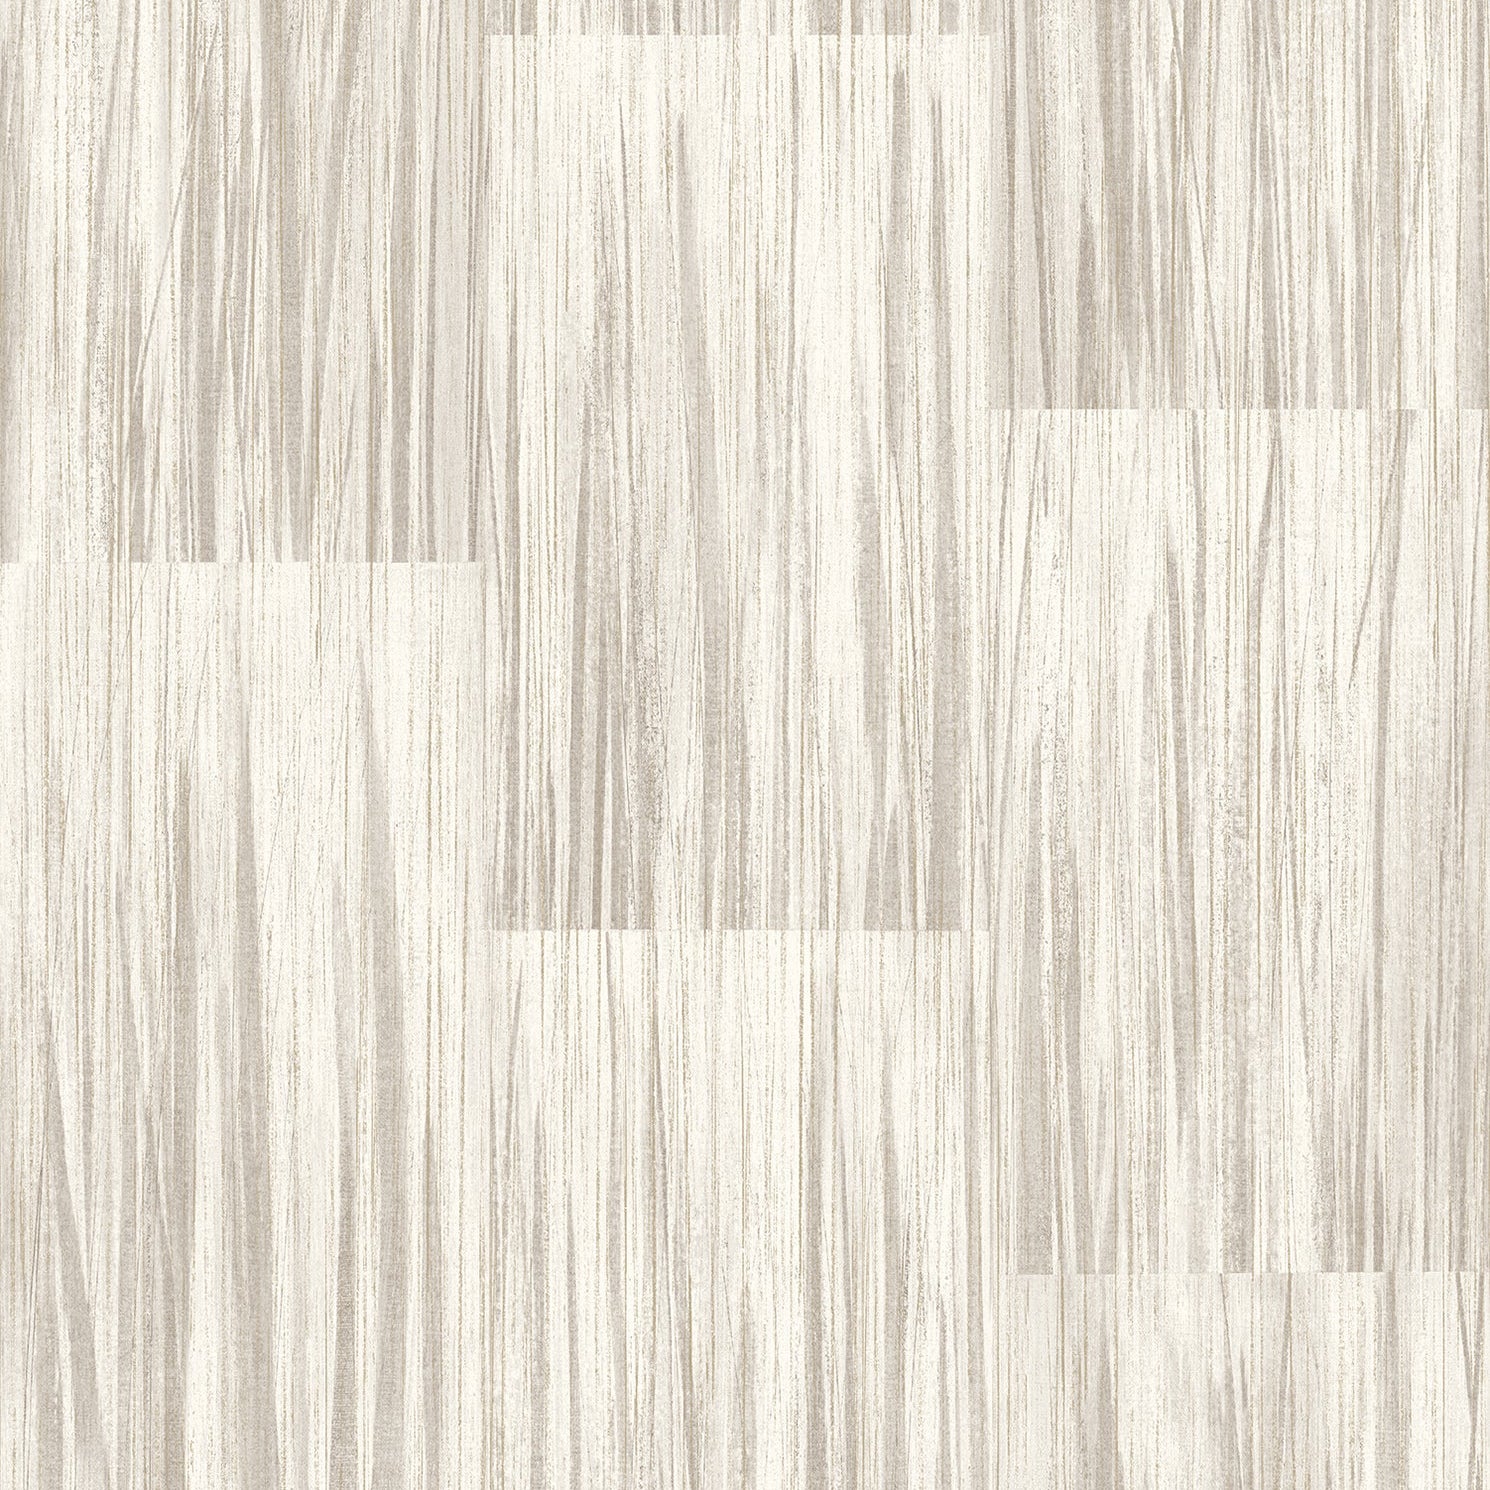 Find 4020-85707 Geo & Textures Soren Taupe Striated Plank Taupe by Advantage